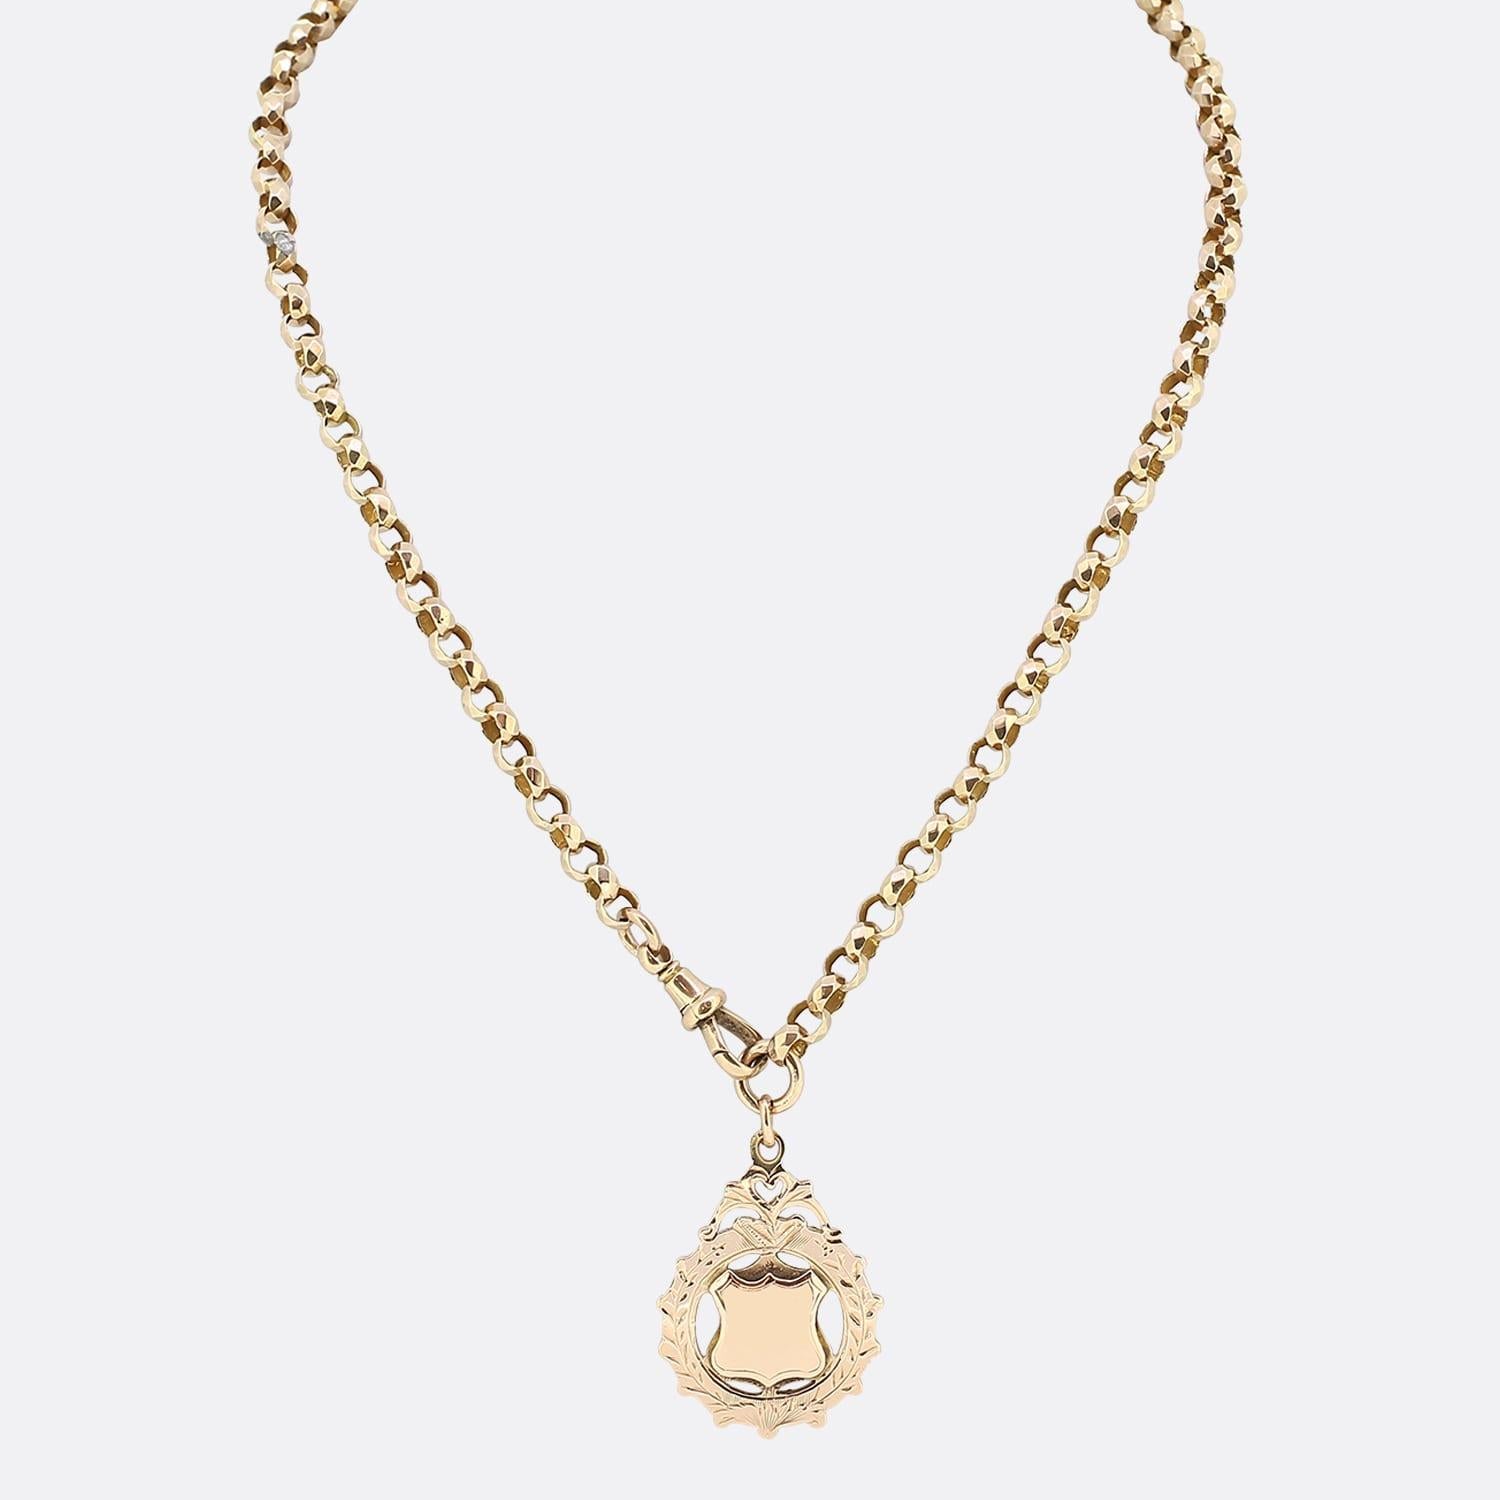 This is a vintage 9ct rose gold belcher charm necklace. The necklace has an antique fob suspended from the faceted belcher link chain. The necklace is secured by an antique swivel clasp.

Condition: Used (Very Good)
Weight: 22.0 grams
Chain Length: